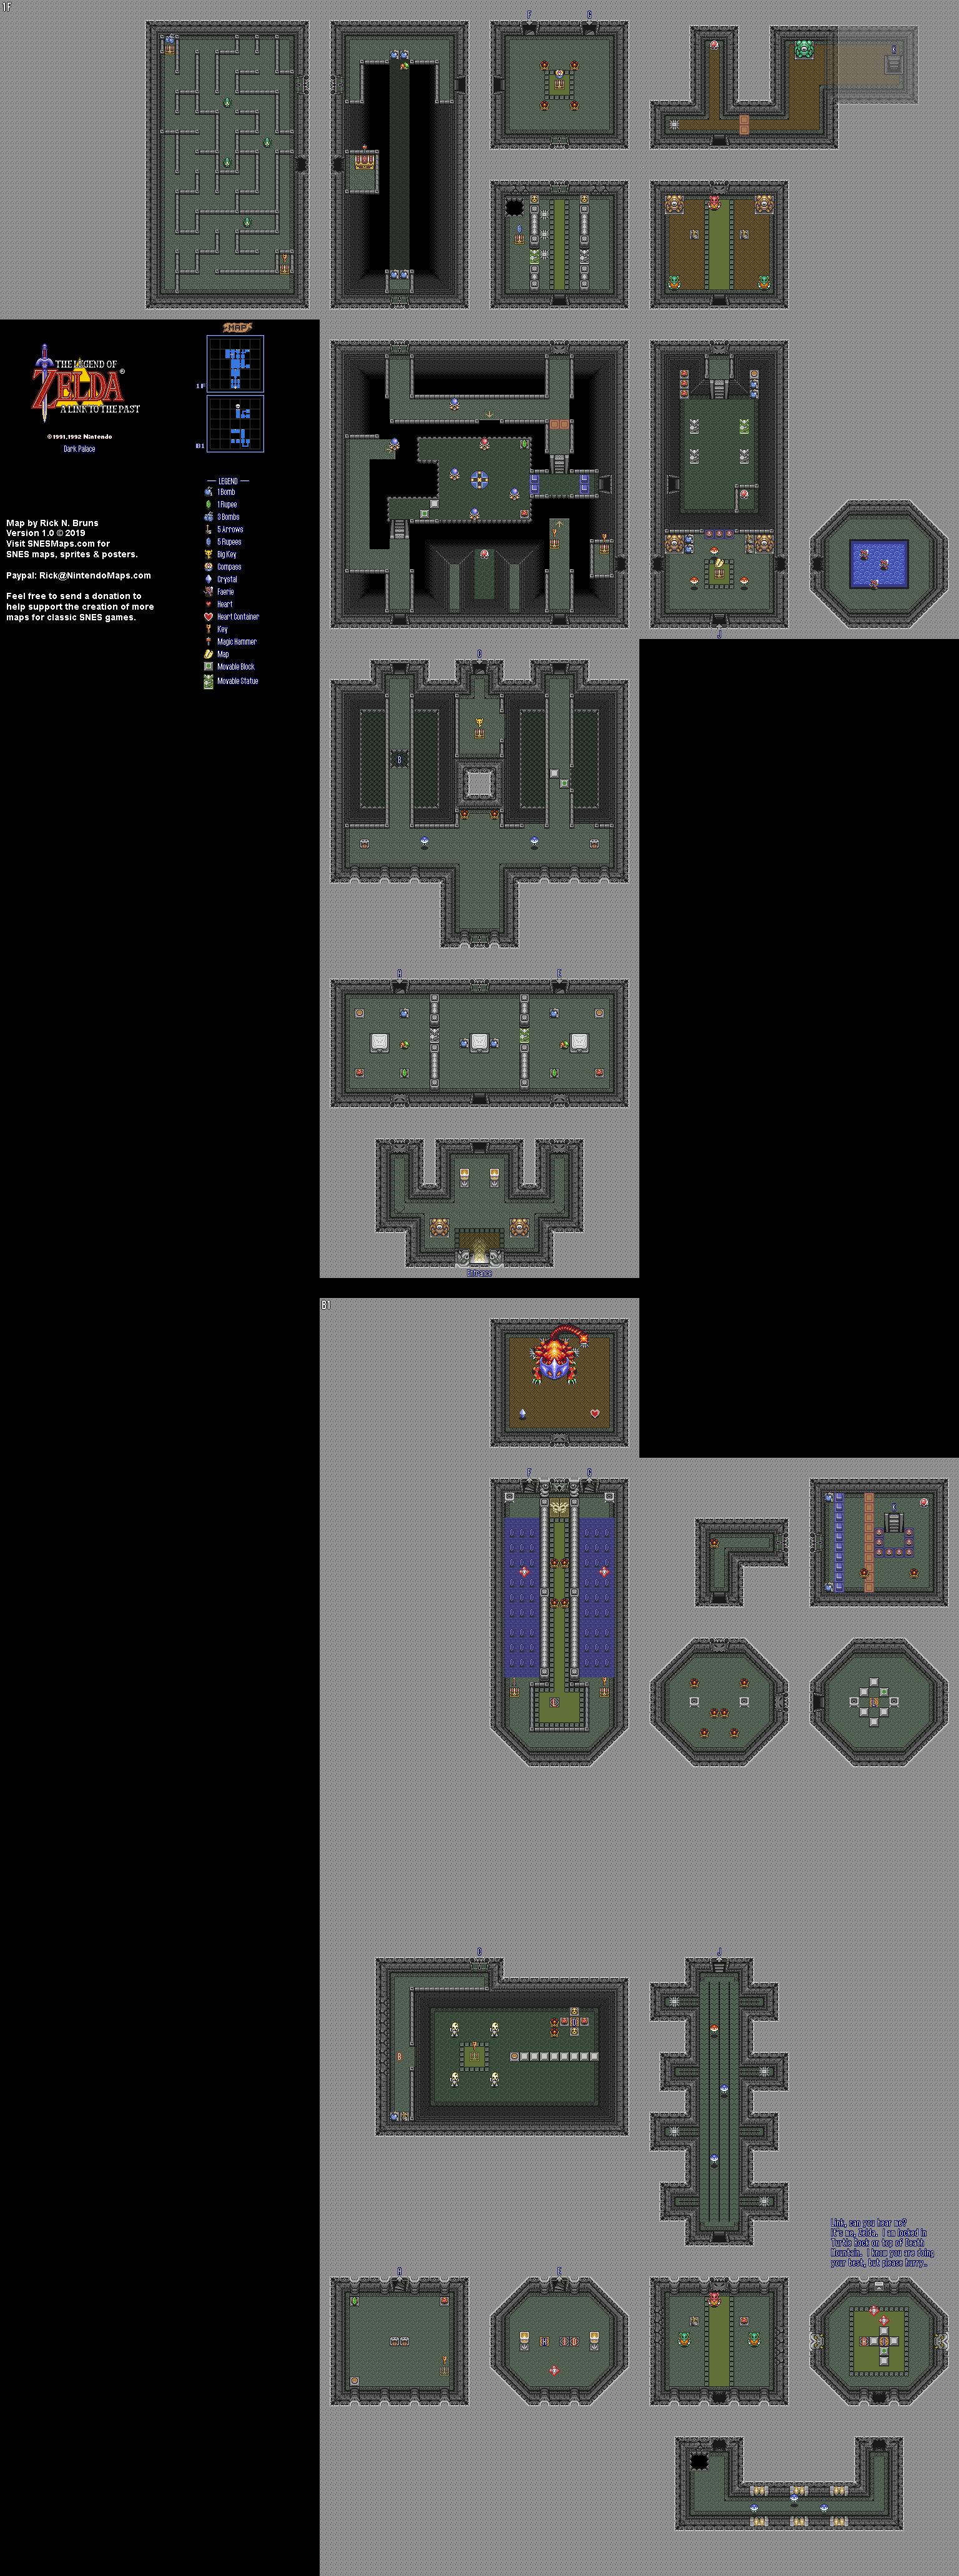 The Legend of Zelda: A Link to the Past - Dark Palace Map - SNES Super Nintendo